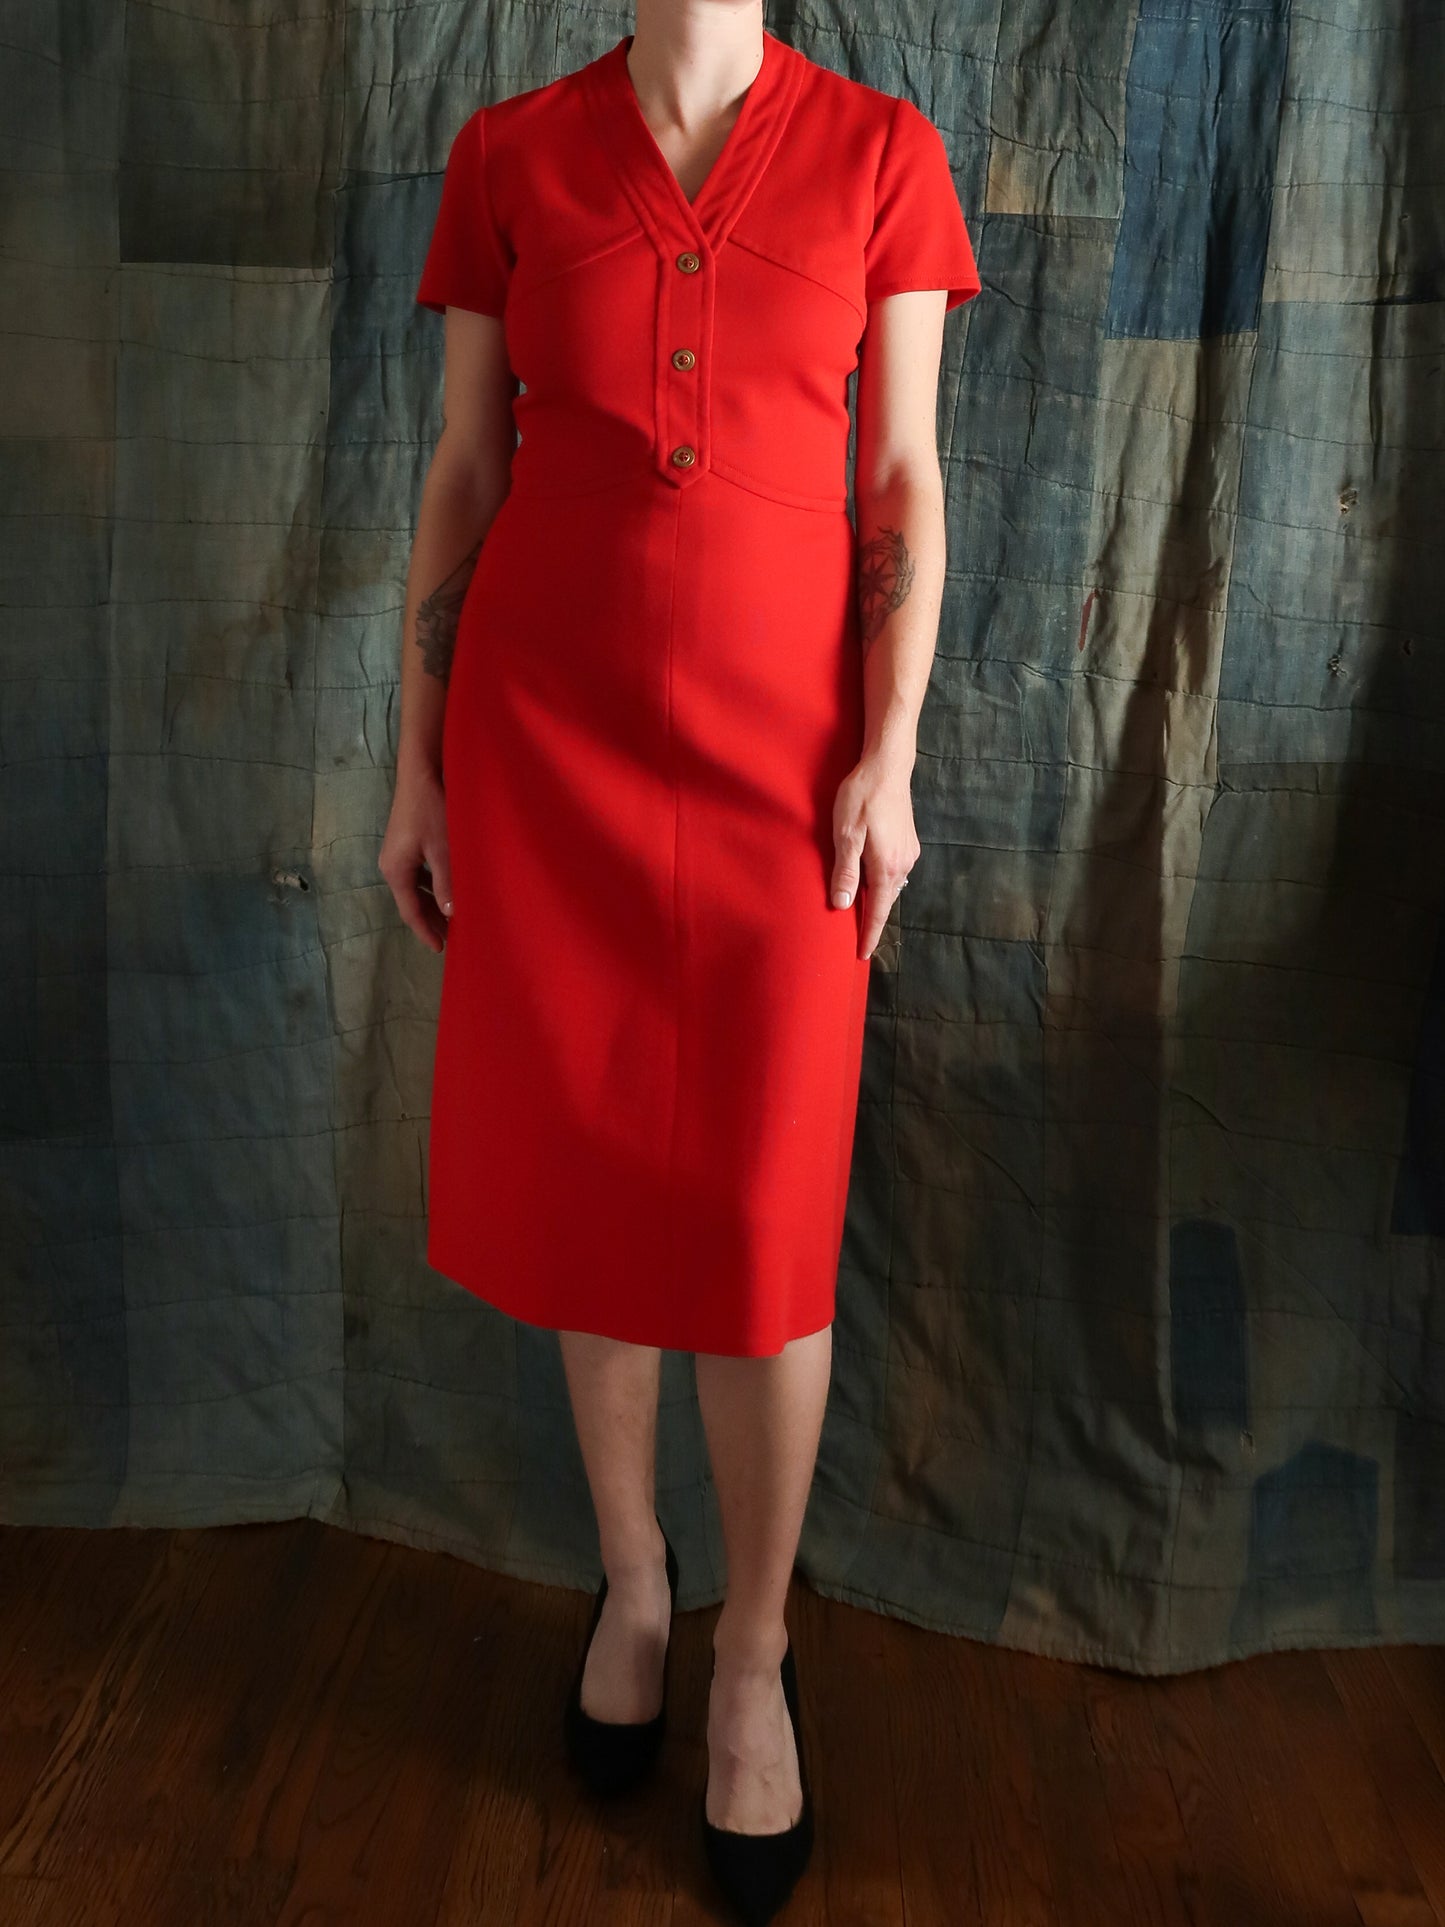 1950s/60s Red Dress Size S/M